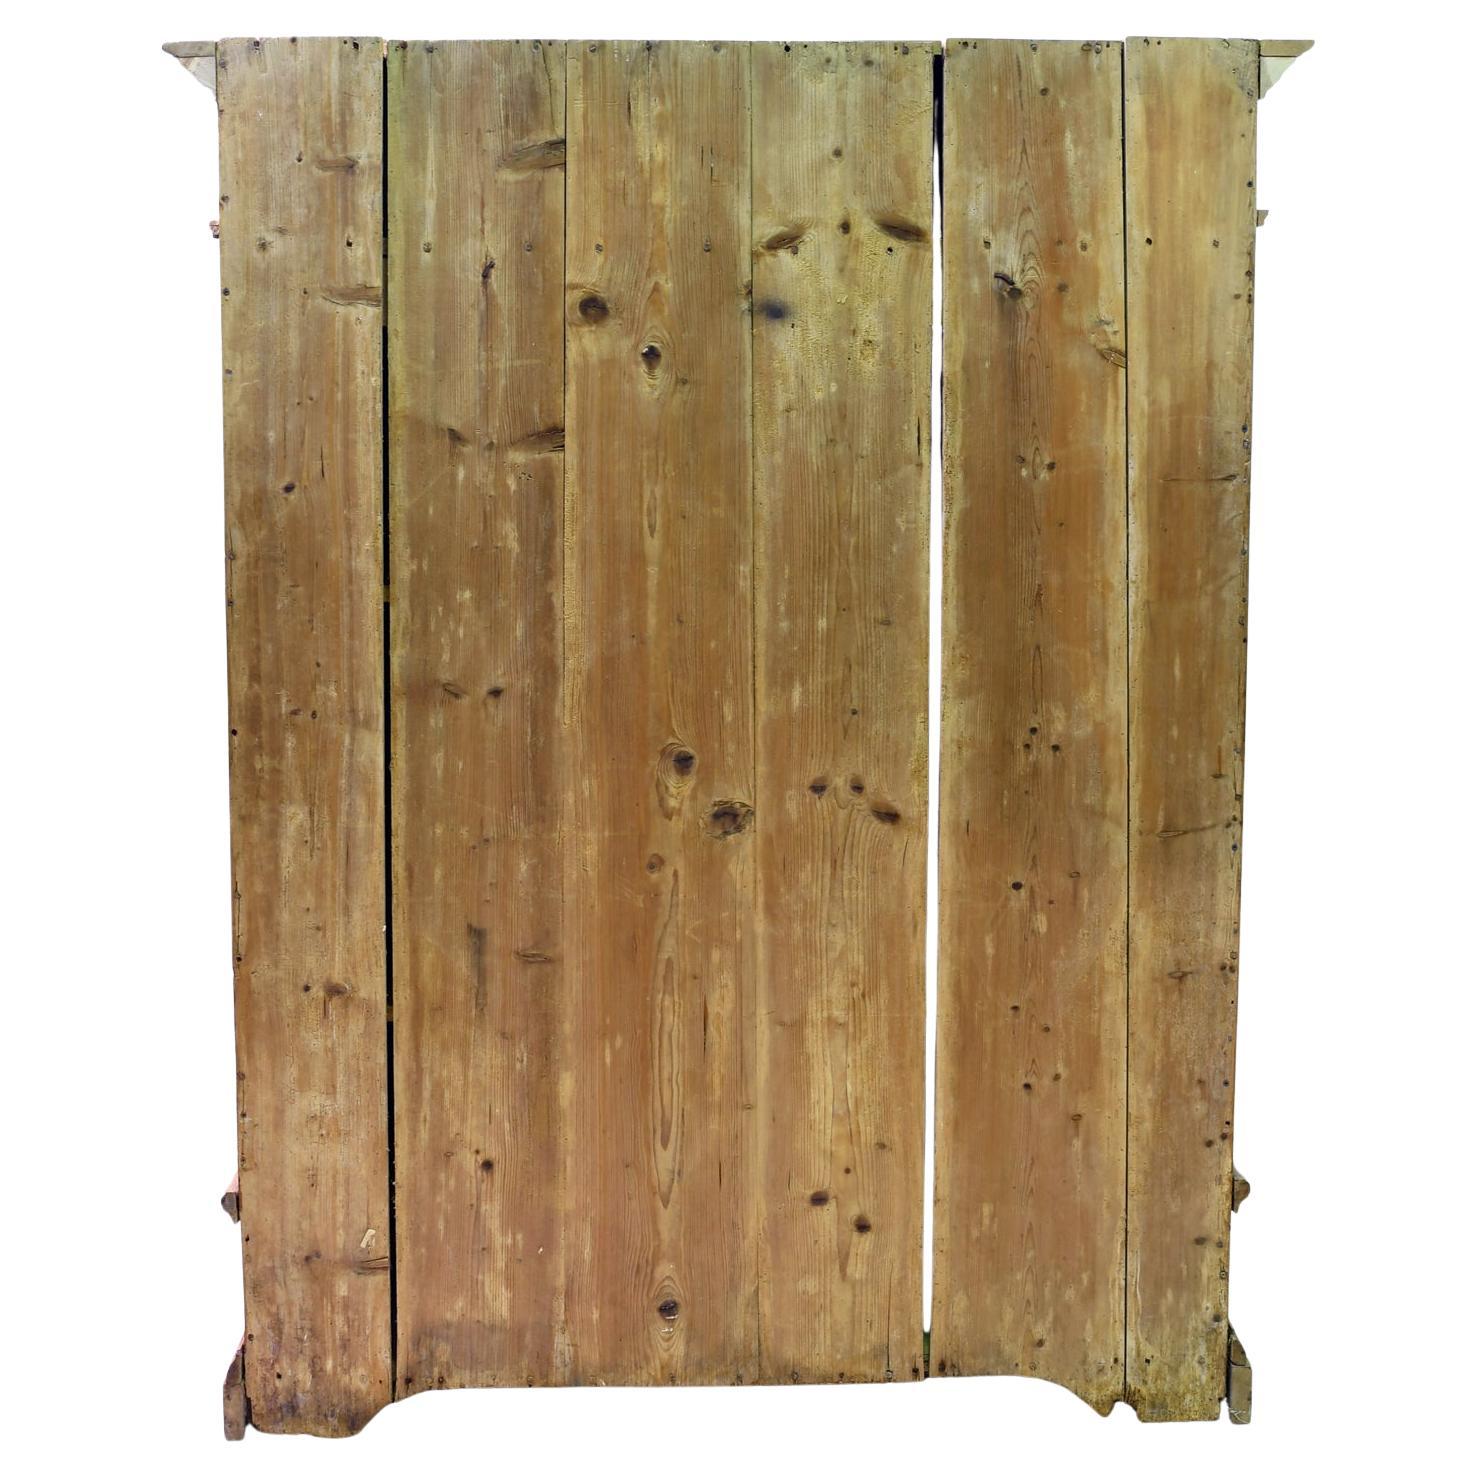 Hand-Crafted Antique European Pine Armoire with Interior Adjustable Shelves, circa 1850